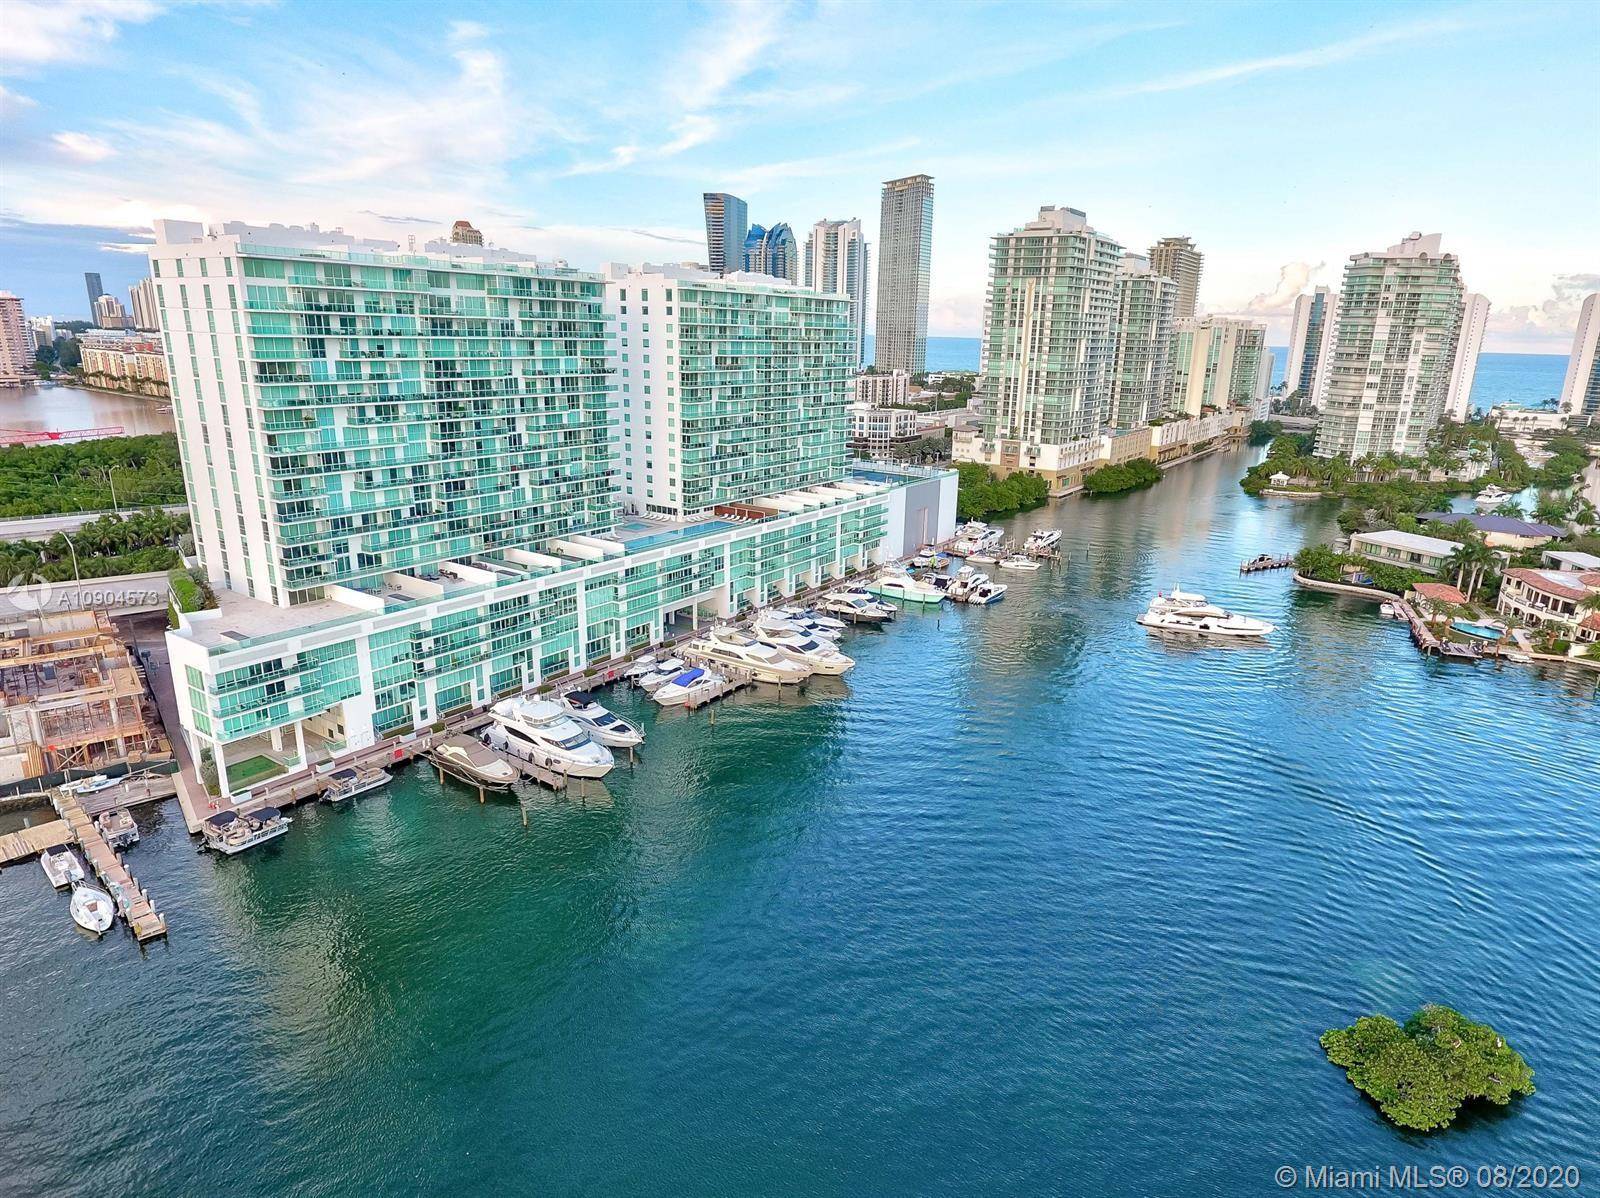 SUNNY ISLES RESTAURANT COMMERCIAL RETAIL SPACE BUSINESS OPPORTUNITY.